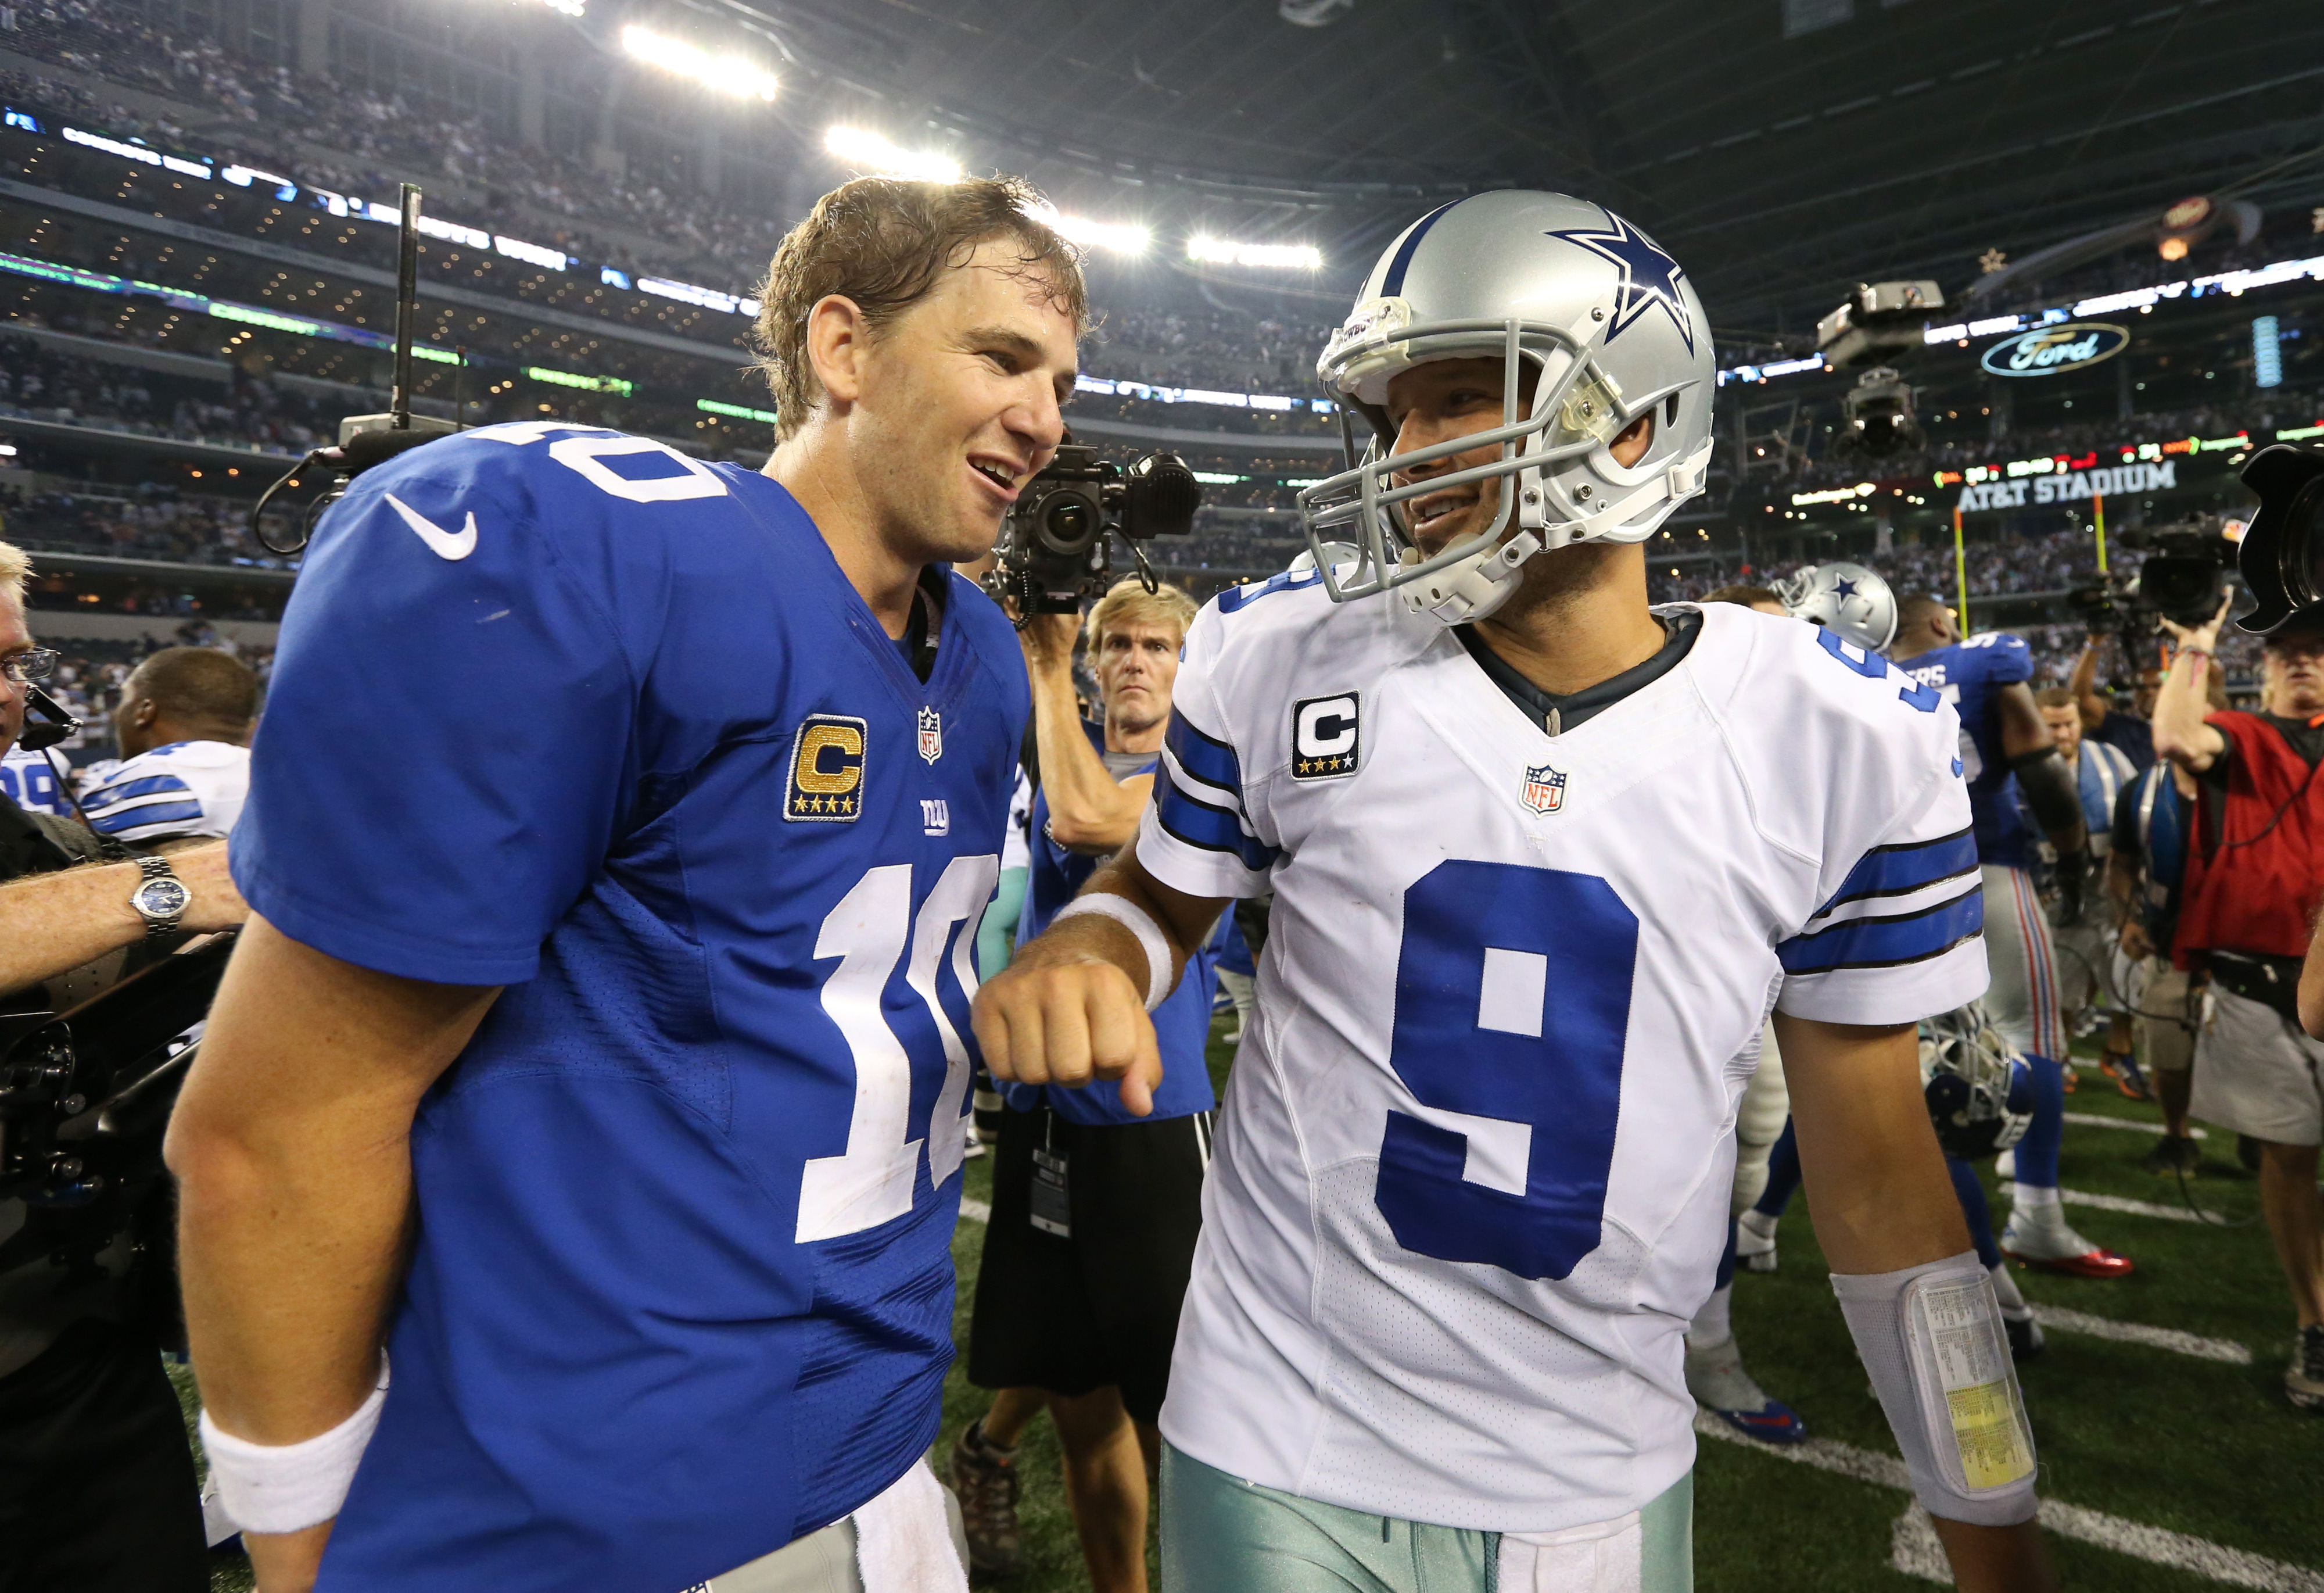 Eli Manning will look to avenge his team's early season loss to Tony Romo and the rival Cowboys.